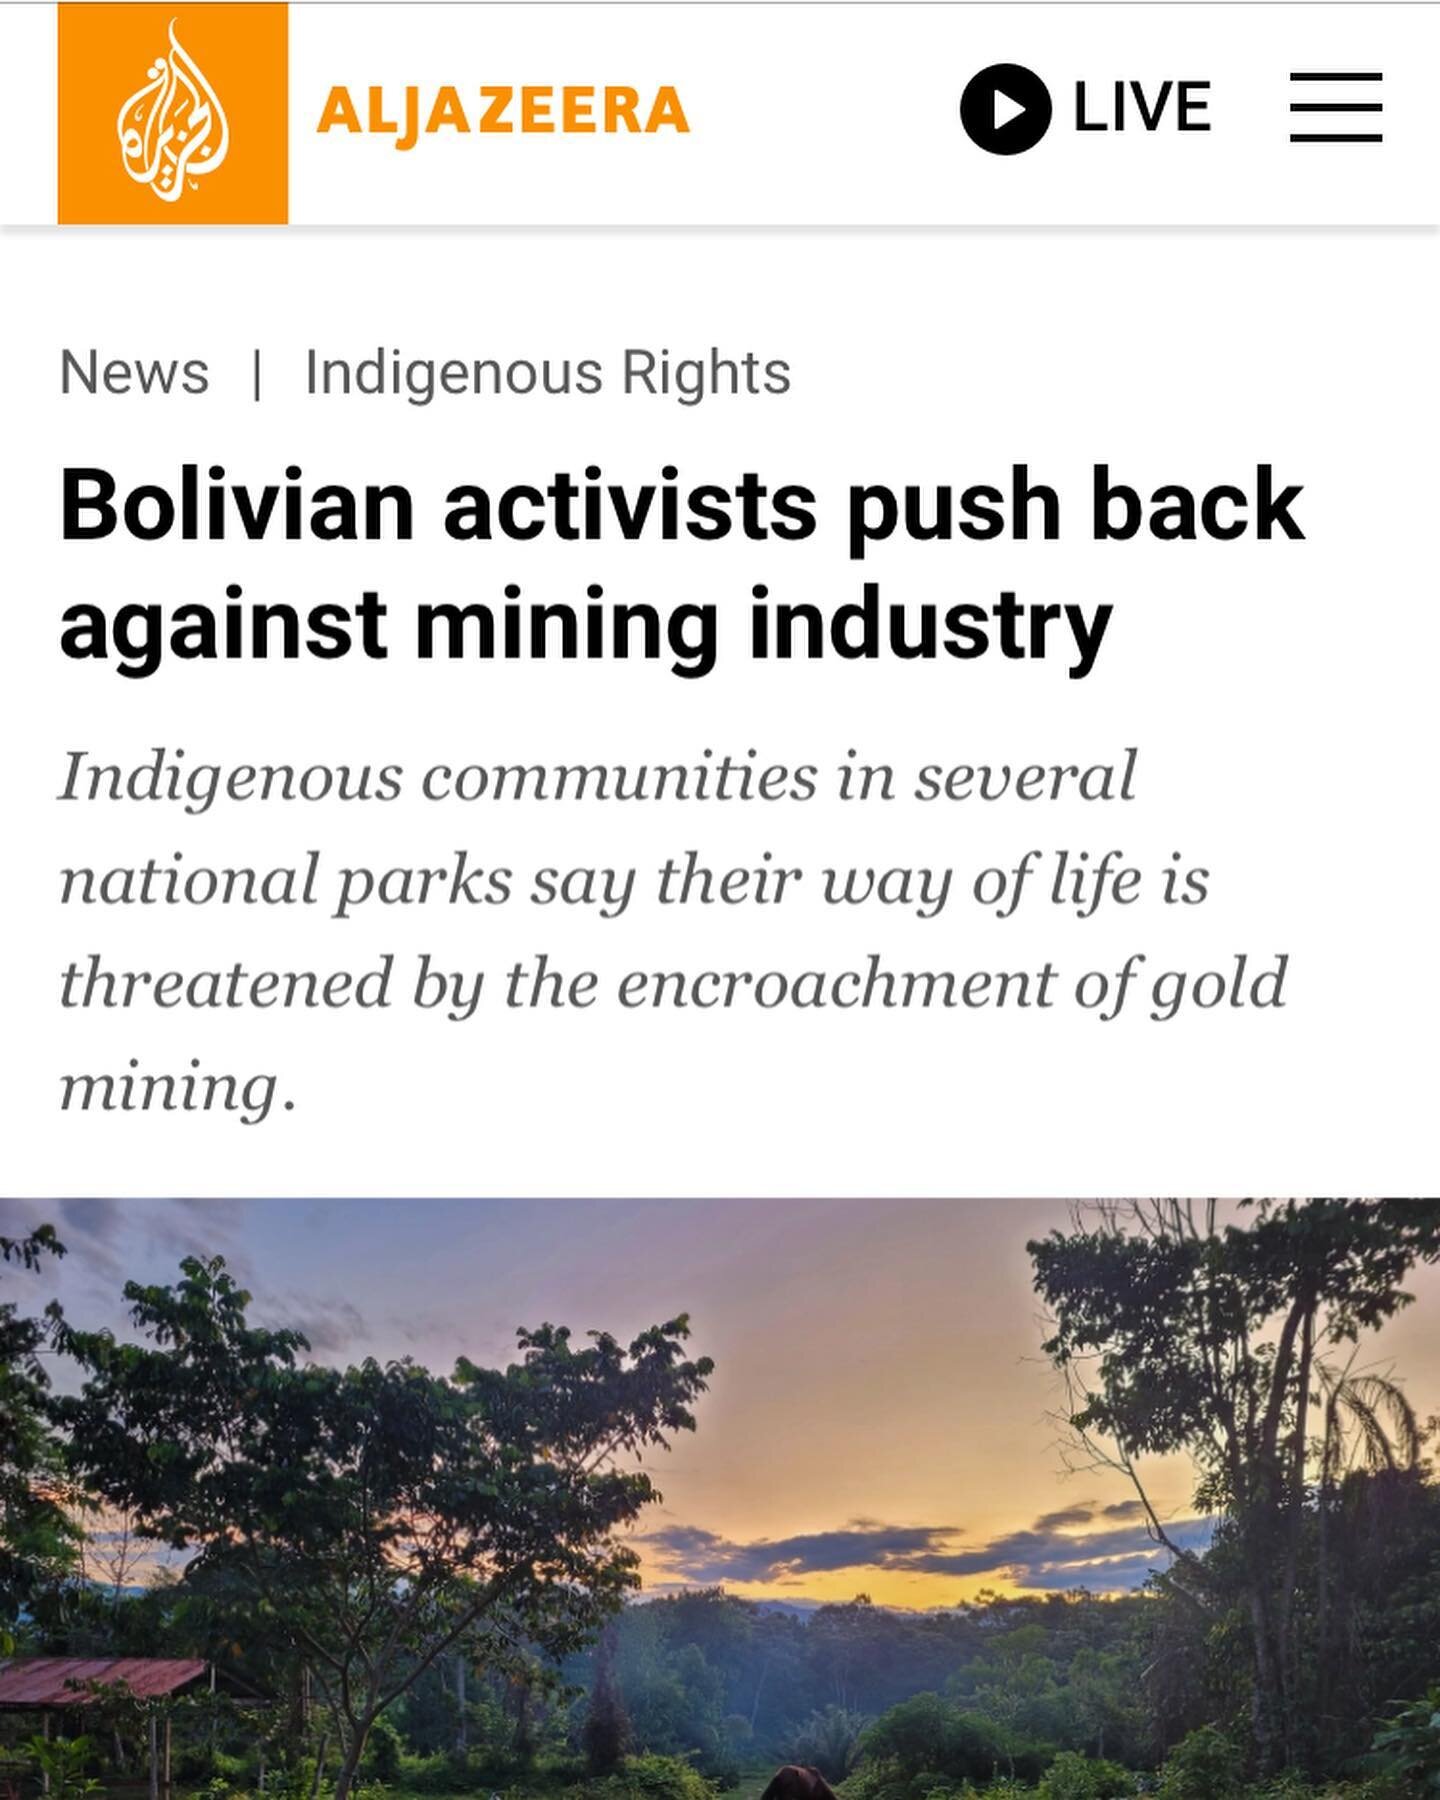 Very proud to have co-authored this article for @aljazeeraenglish which has just been published. It covers the recent deals that the Bolivian government has made with the gold mining industry and the effect this would have on protected areas and indi